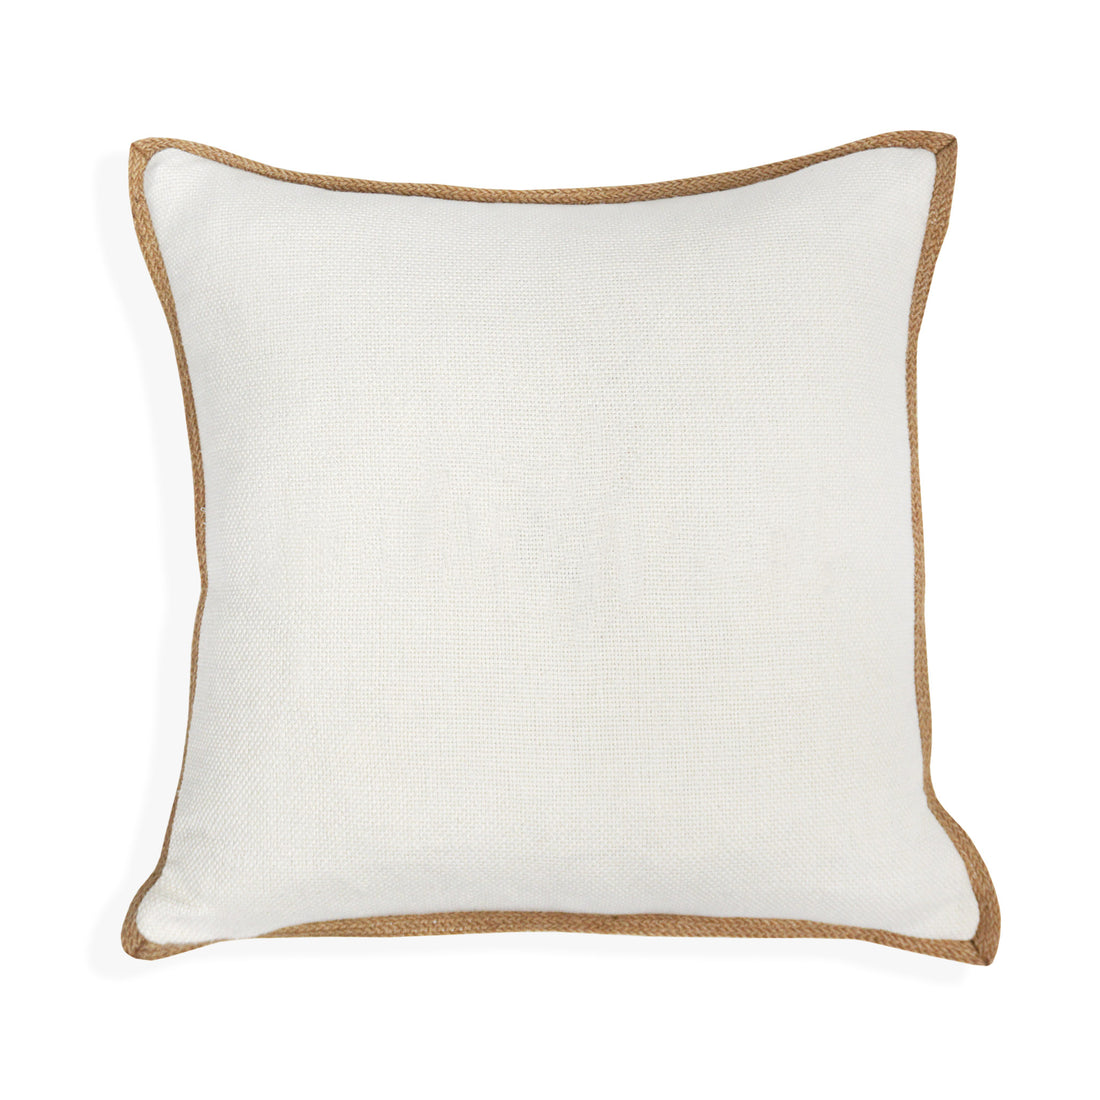 Be Our Guest Throw Pillow Cover | Ivory/Black | 20" x 20"